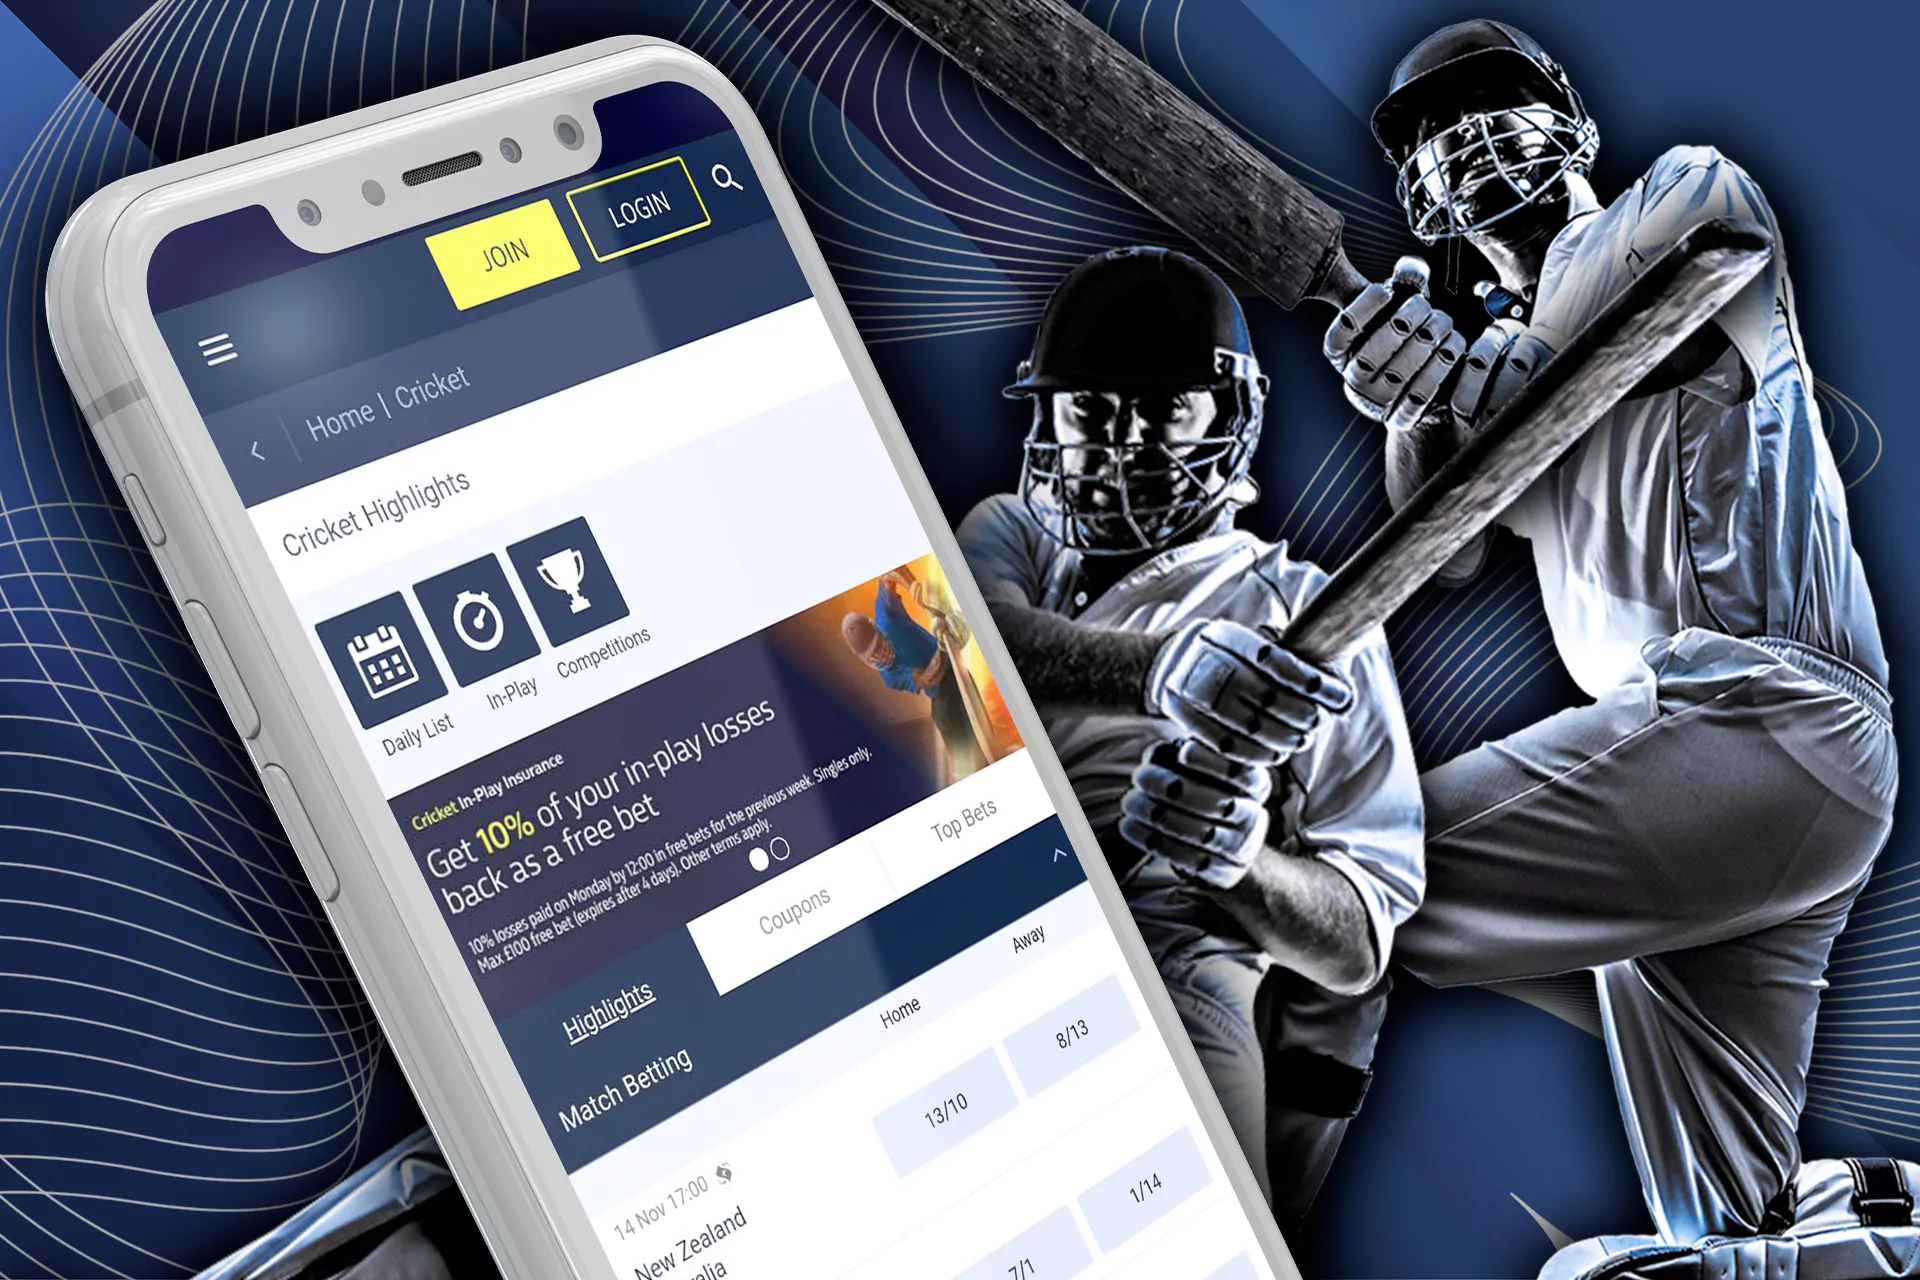 You can easily bet on cricket via the William Hill app.